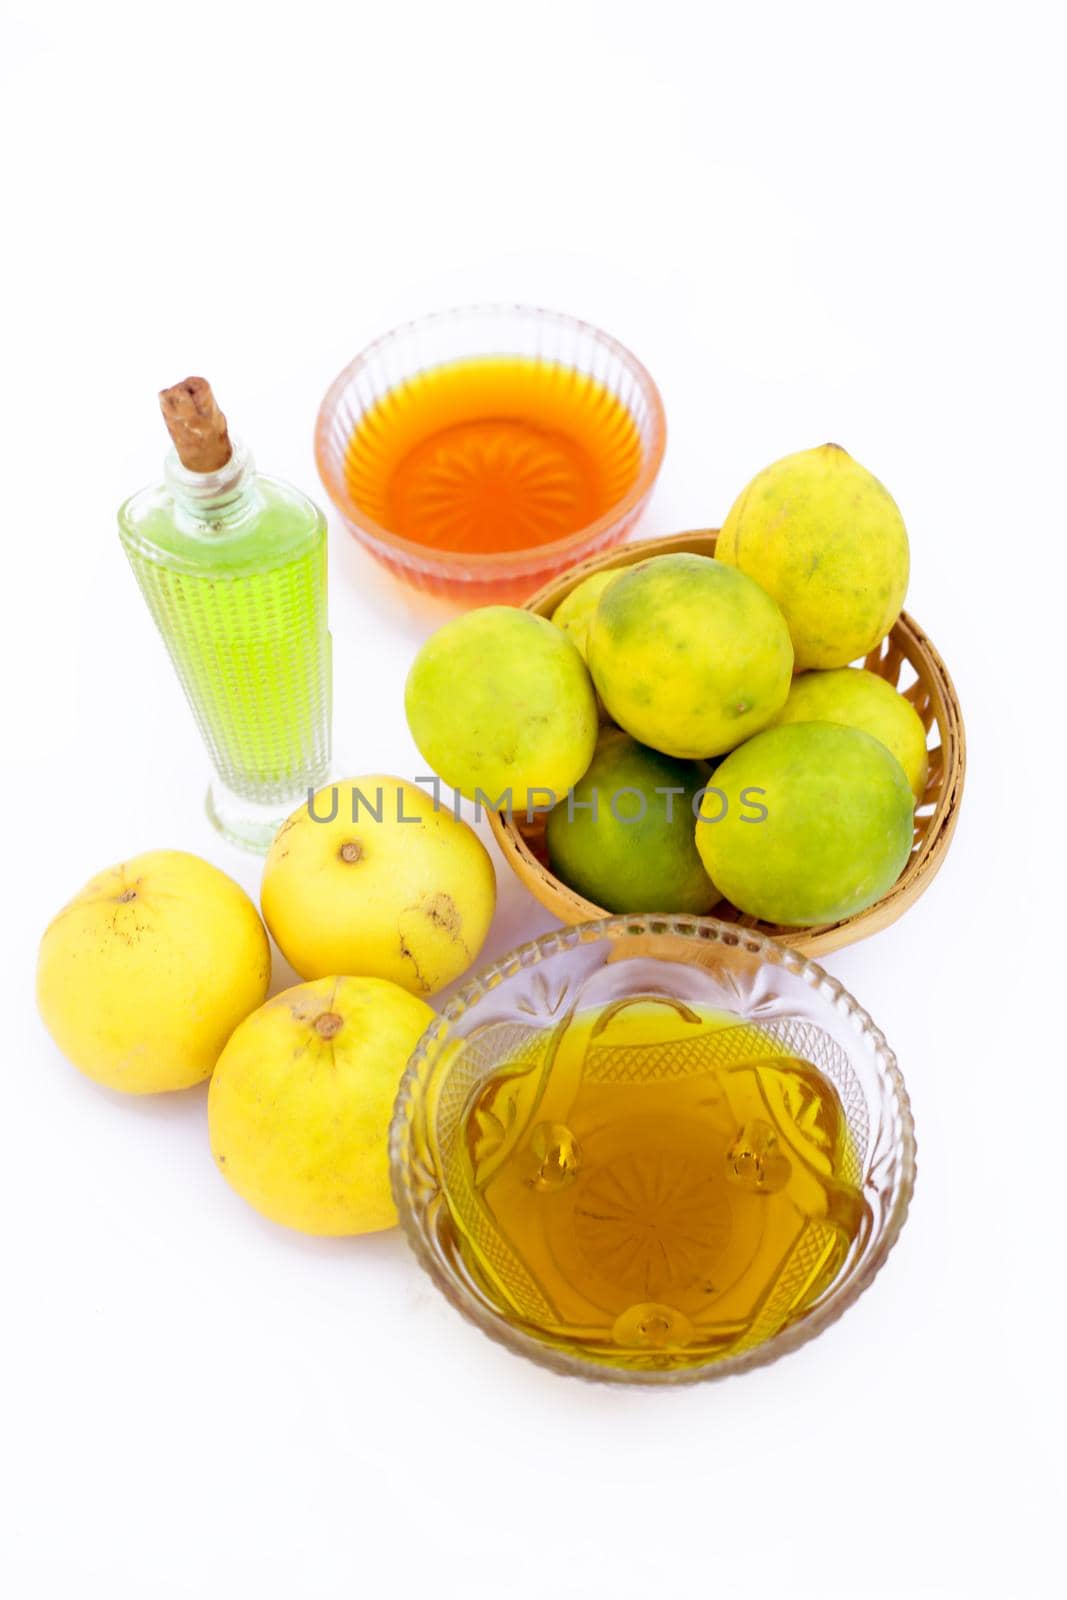 Lemon hair growth mask isolated on white i.e. Lemon juice well mixed with honey and Olive oil in a glass bowl with entire raw ingredients.